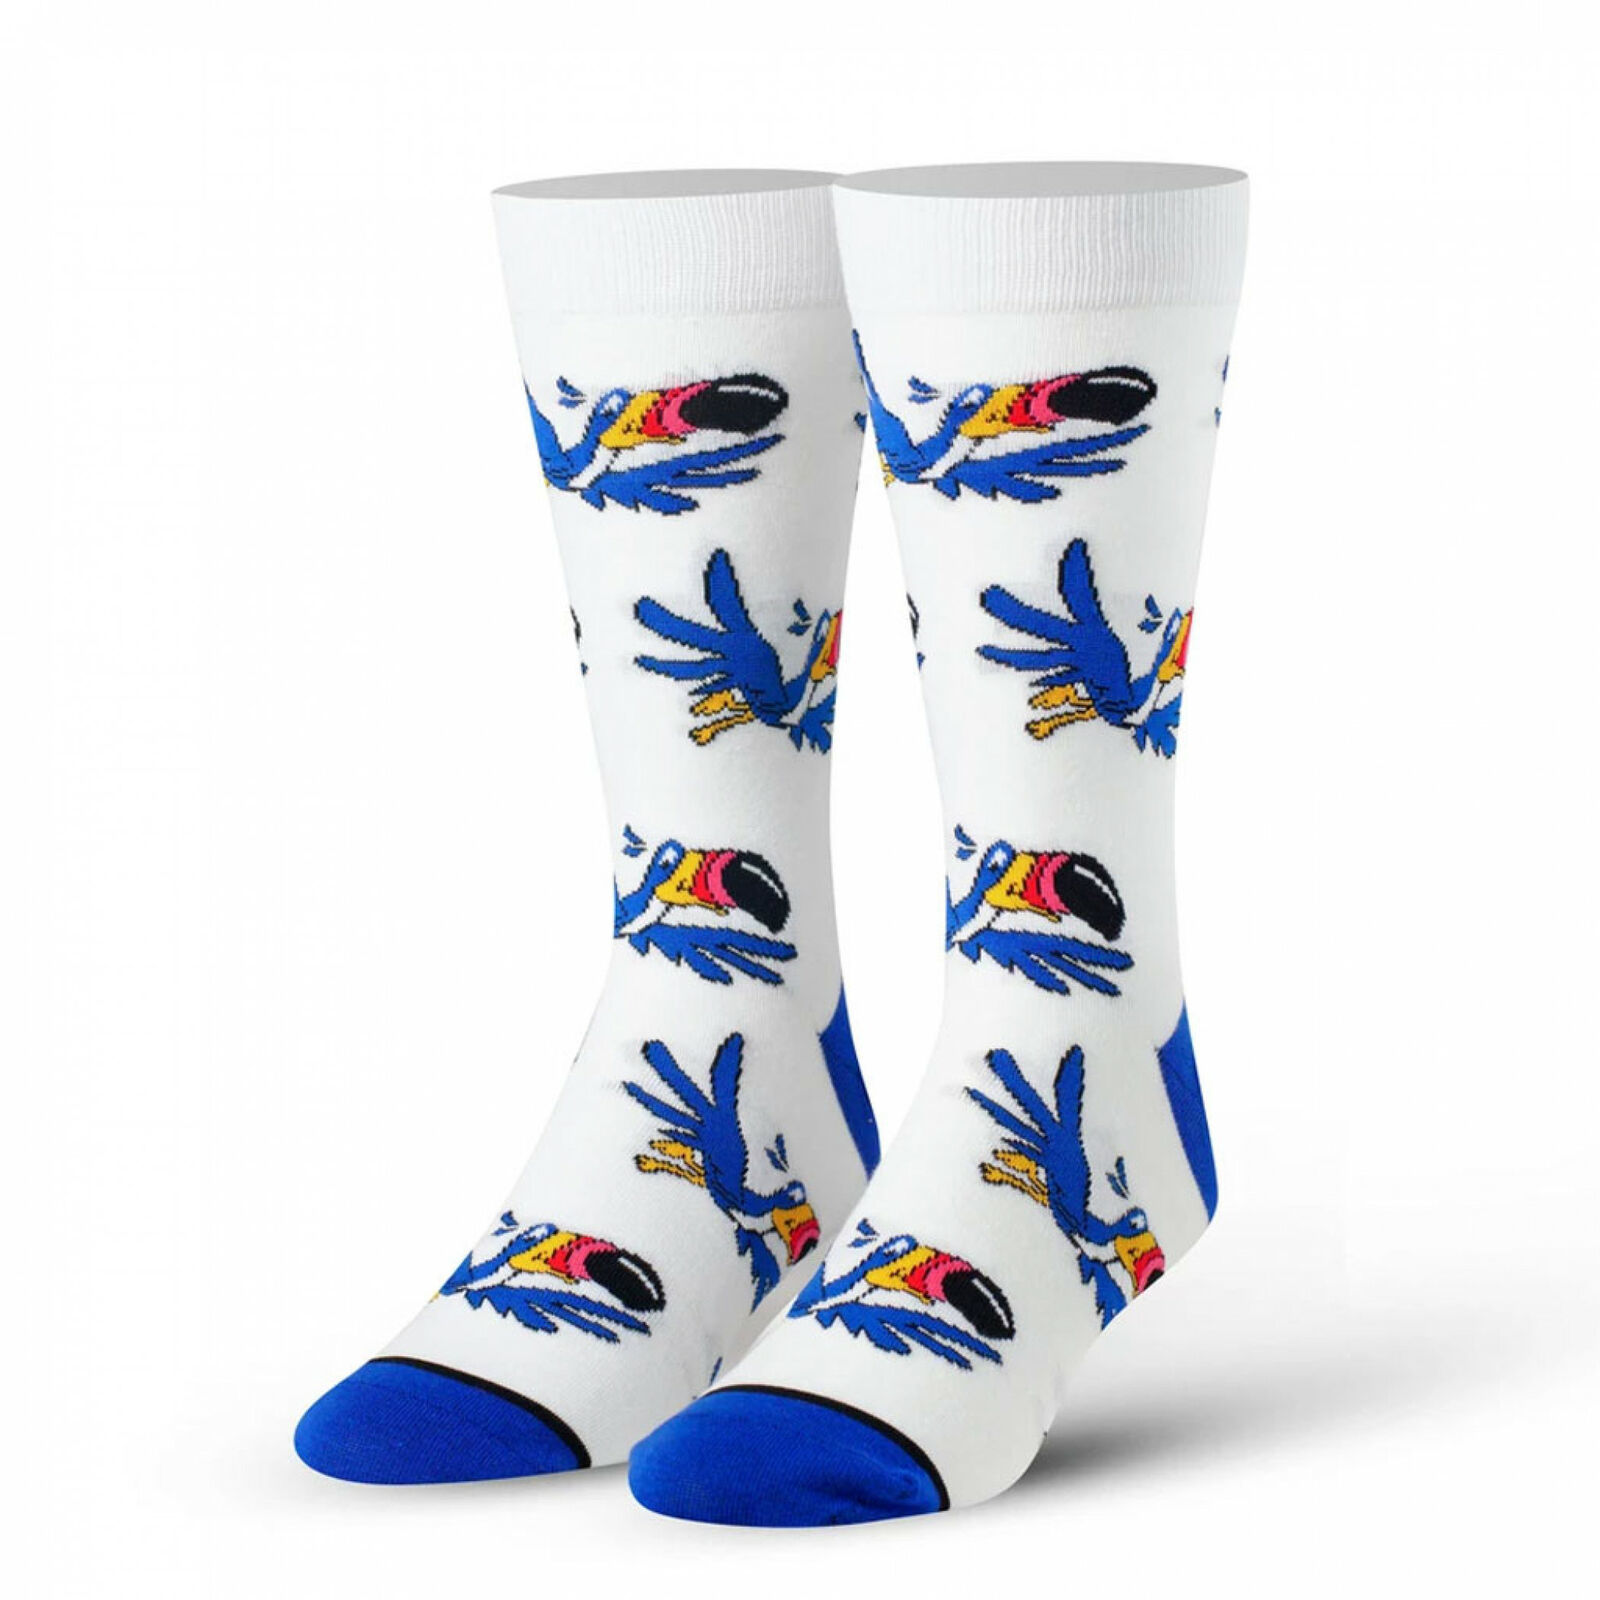 Froot Loops Follow Your Nose Toucan Sam Socks White - Socks